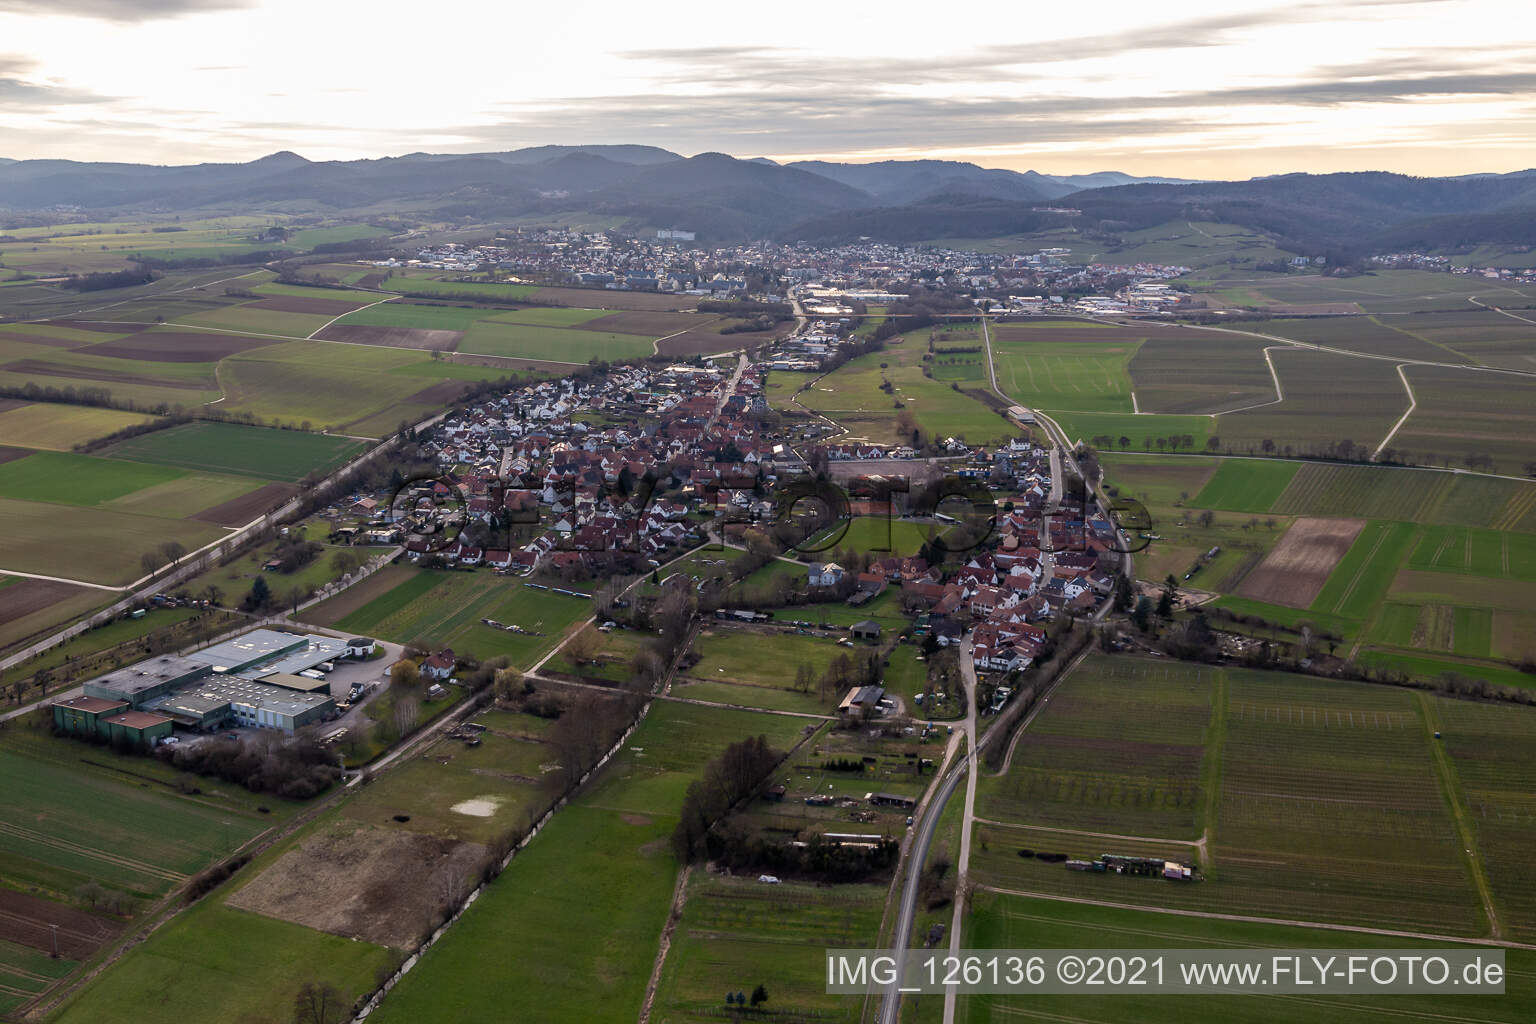 District Drusweiler in Kapellen-Drusweiler in the state Rhineland-Palatinate, Germany from the plane